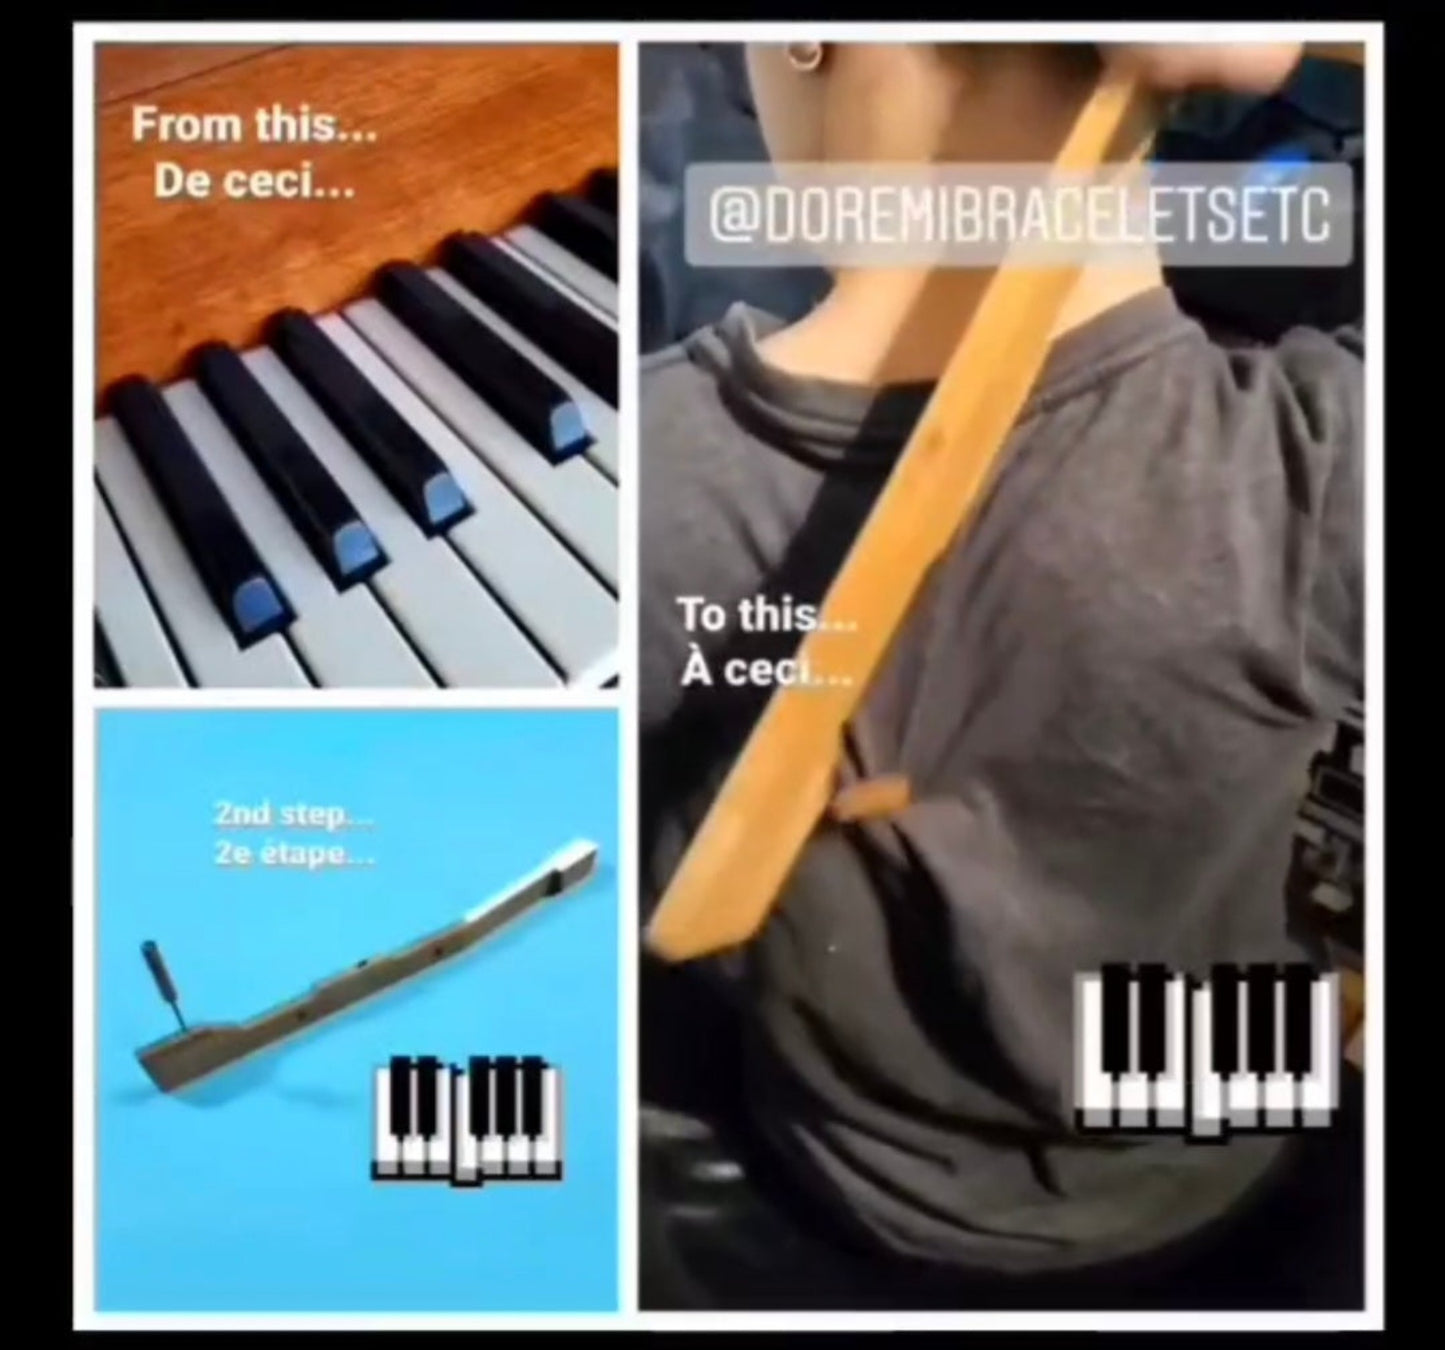 three images - top left has piano keys and the words from this/de ceci, bottom left has blue background and a piece of white piano key and the words 2nd step/2e étape, third image is a person's back and they are using the piece of piano key to scratch their back with the words to this/a ceci